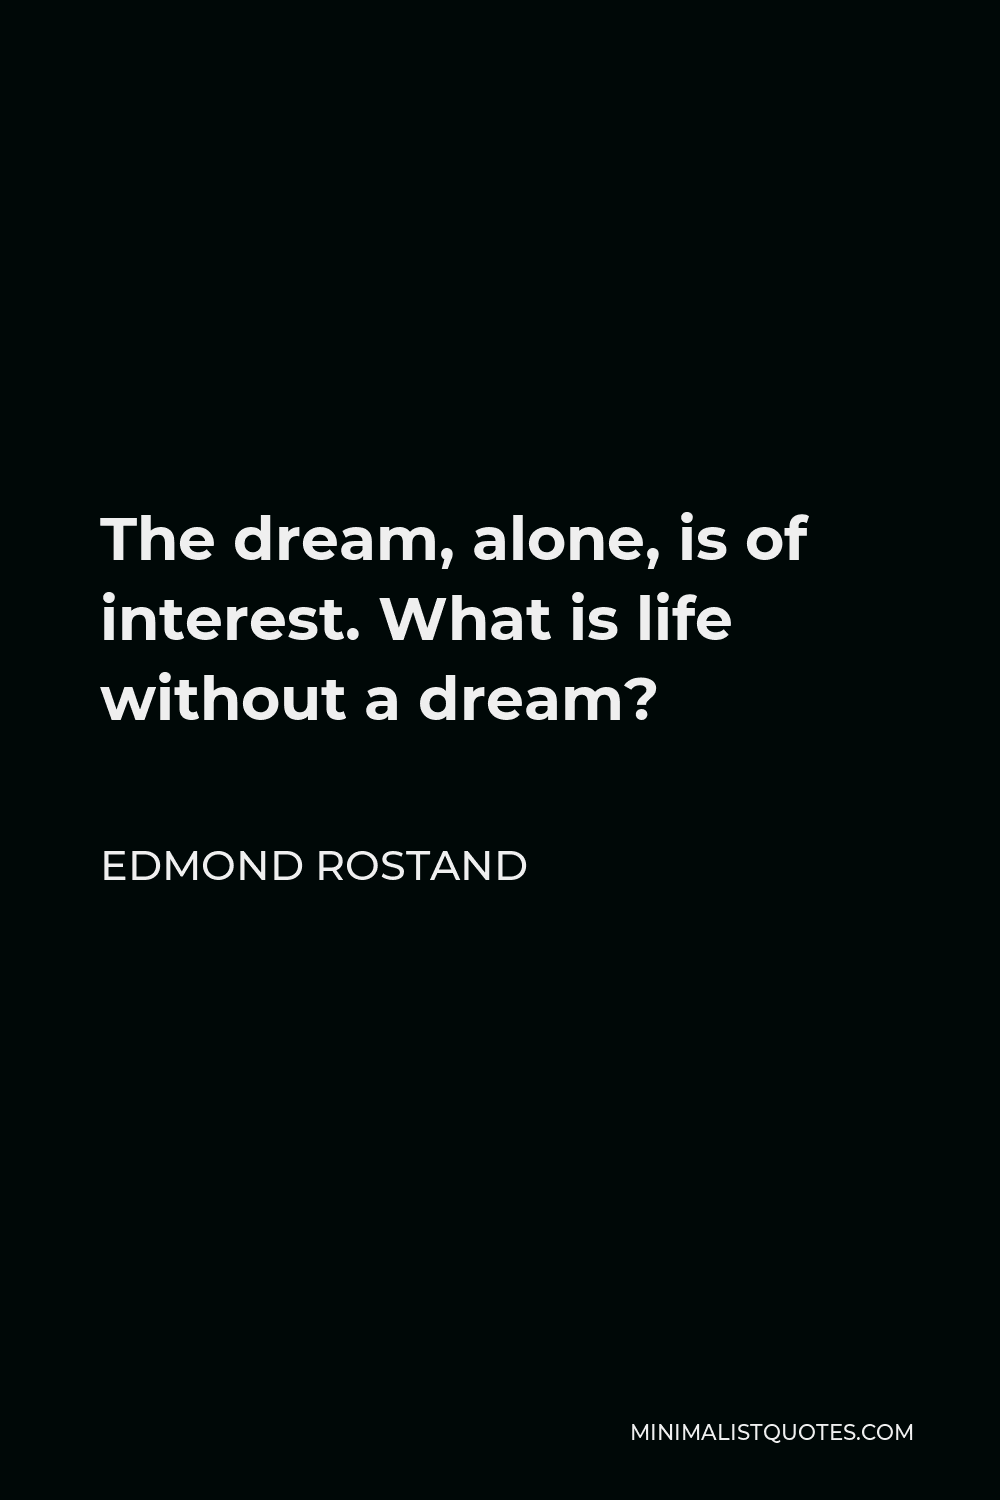 Edmond Rostand Quote - The dream, alone, is of interest. What is life without a dream?